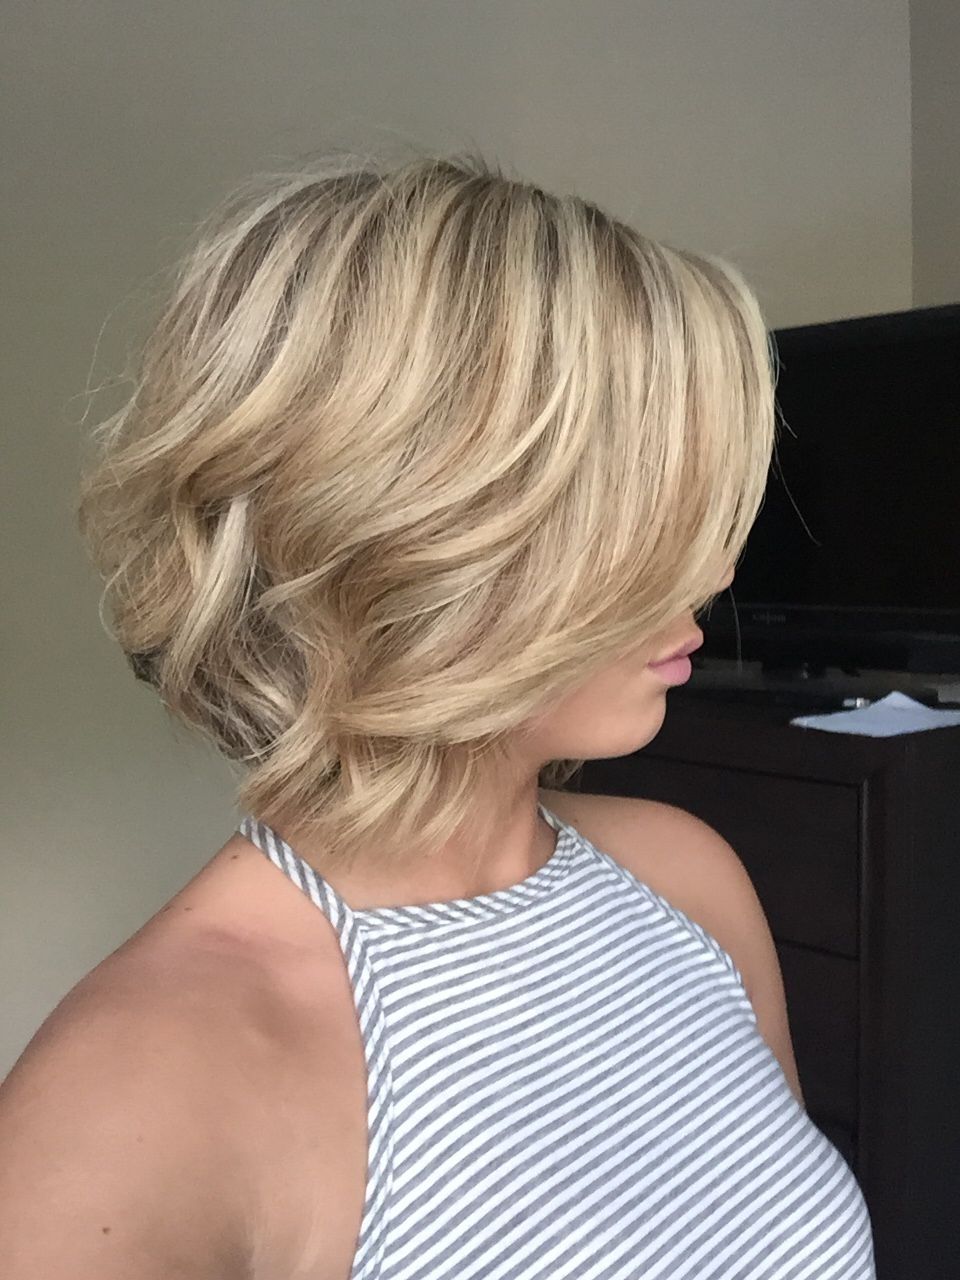 Most Popular Curly Highlighted Blonde Bob Hairstyles Inside Short #blonde #bob #curls #highlights #thickhair (View 19 of 20)